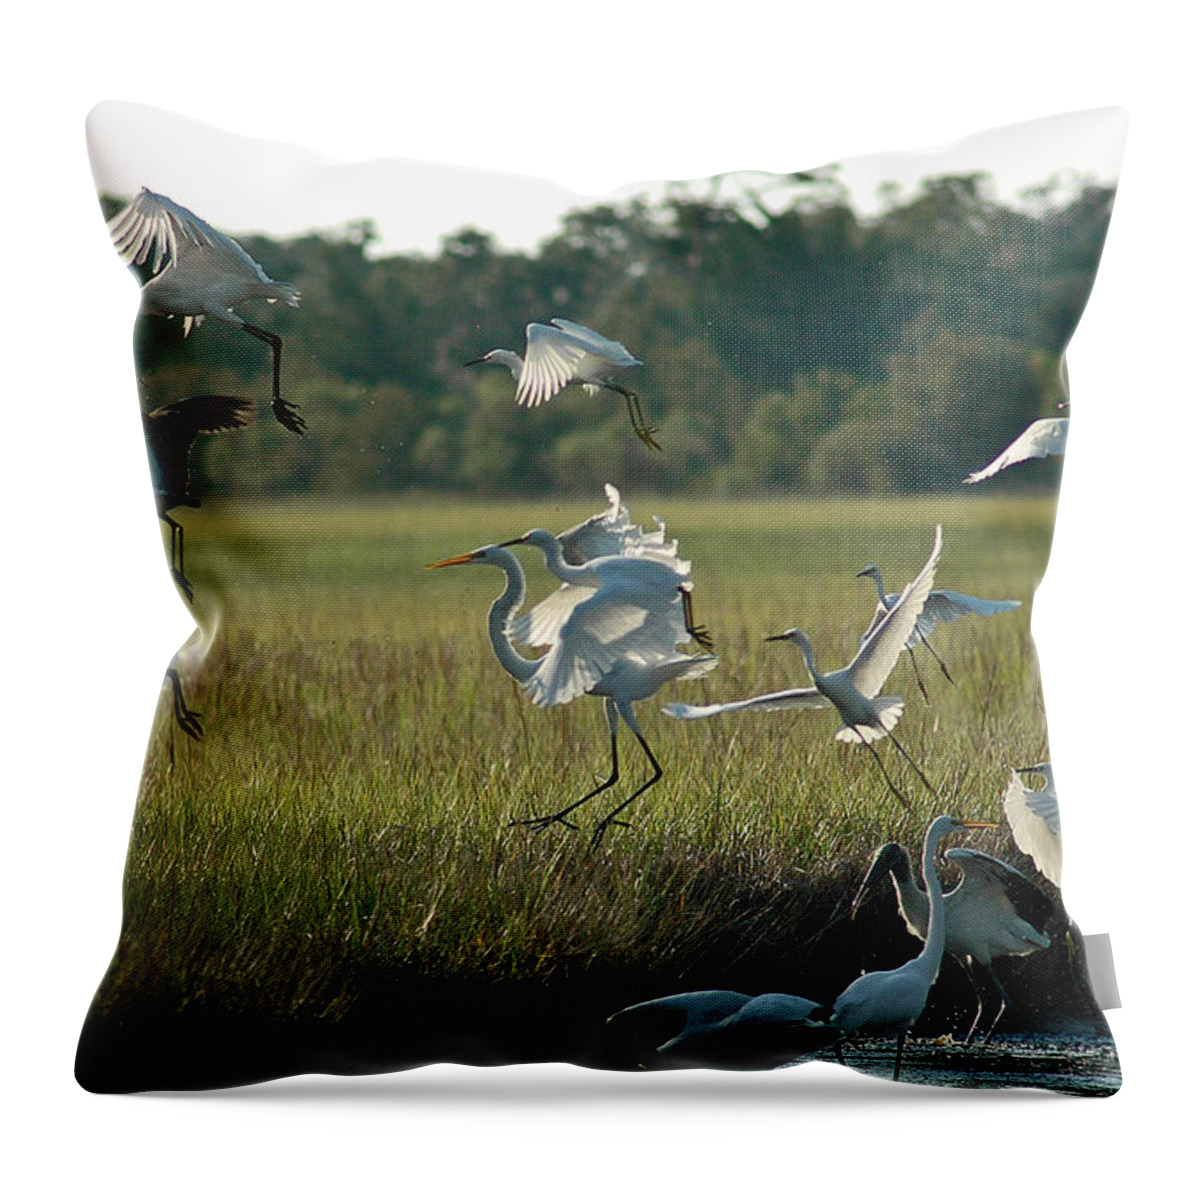 Jekyll Island Throw Pillow featuring the photograph Community Uplift by Bruce Gourley